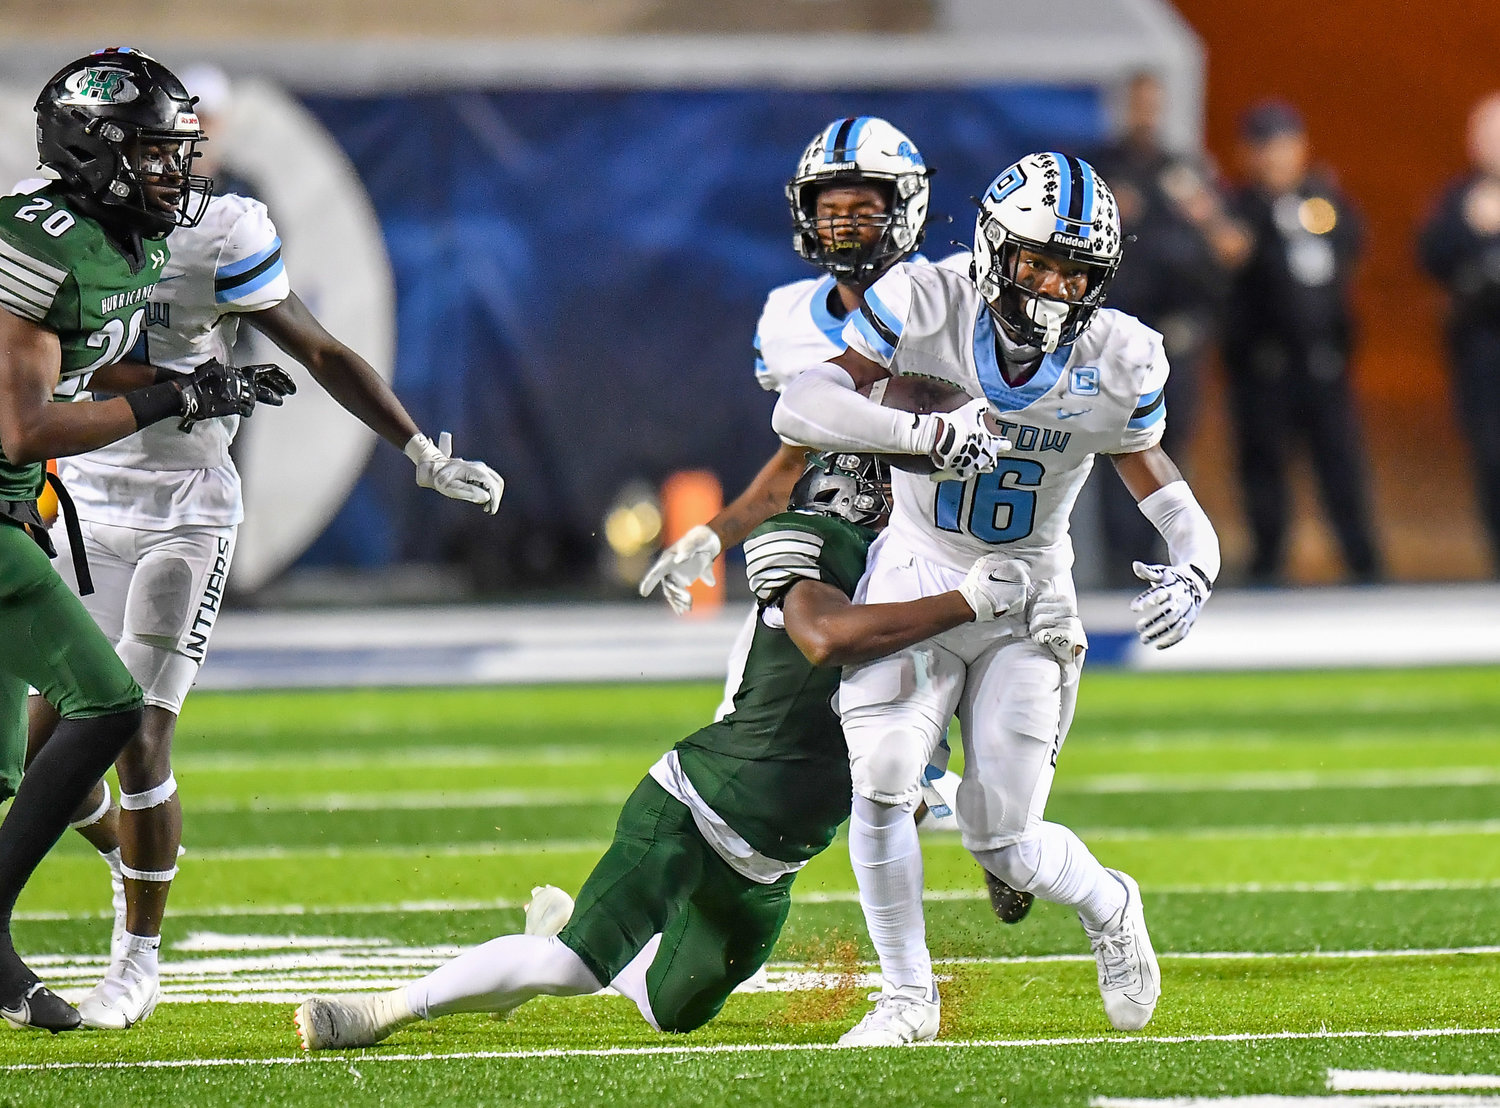 Houston, Tx. Dec 3, 2021: Paetow's Kentrell Webb #16 carries the ball for a first down during the quarterfinal playoff game between Paetow and F,B. Hightower at Rice Stadium in Houston. (Photo by Mark Gooman / Katy Times)